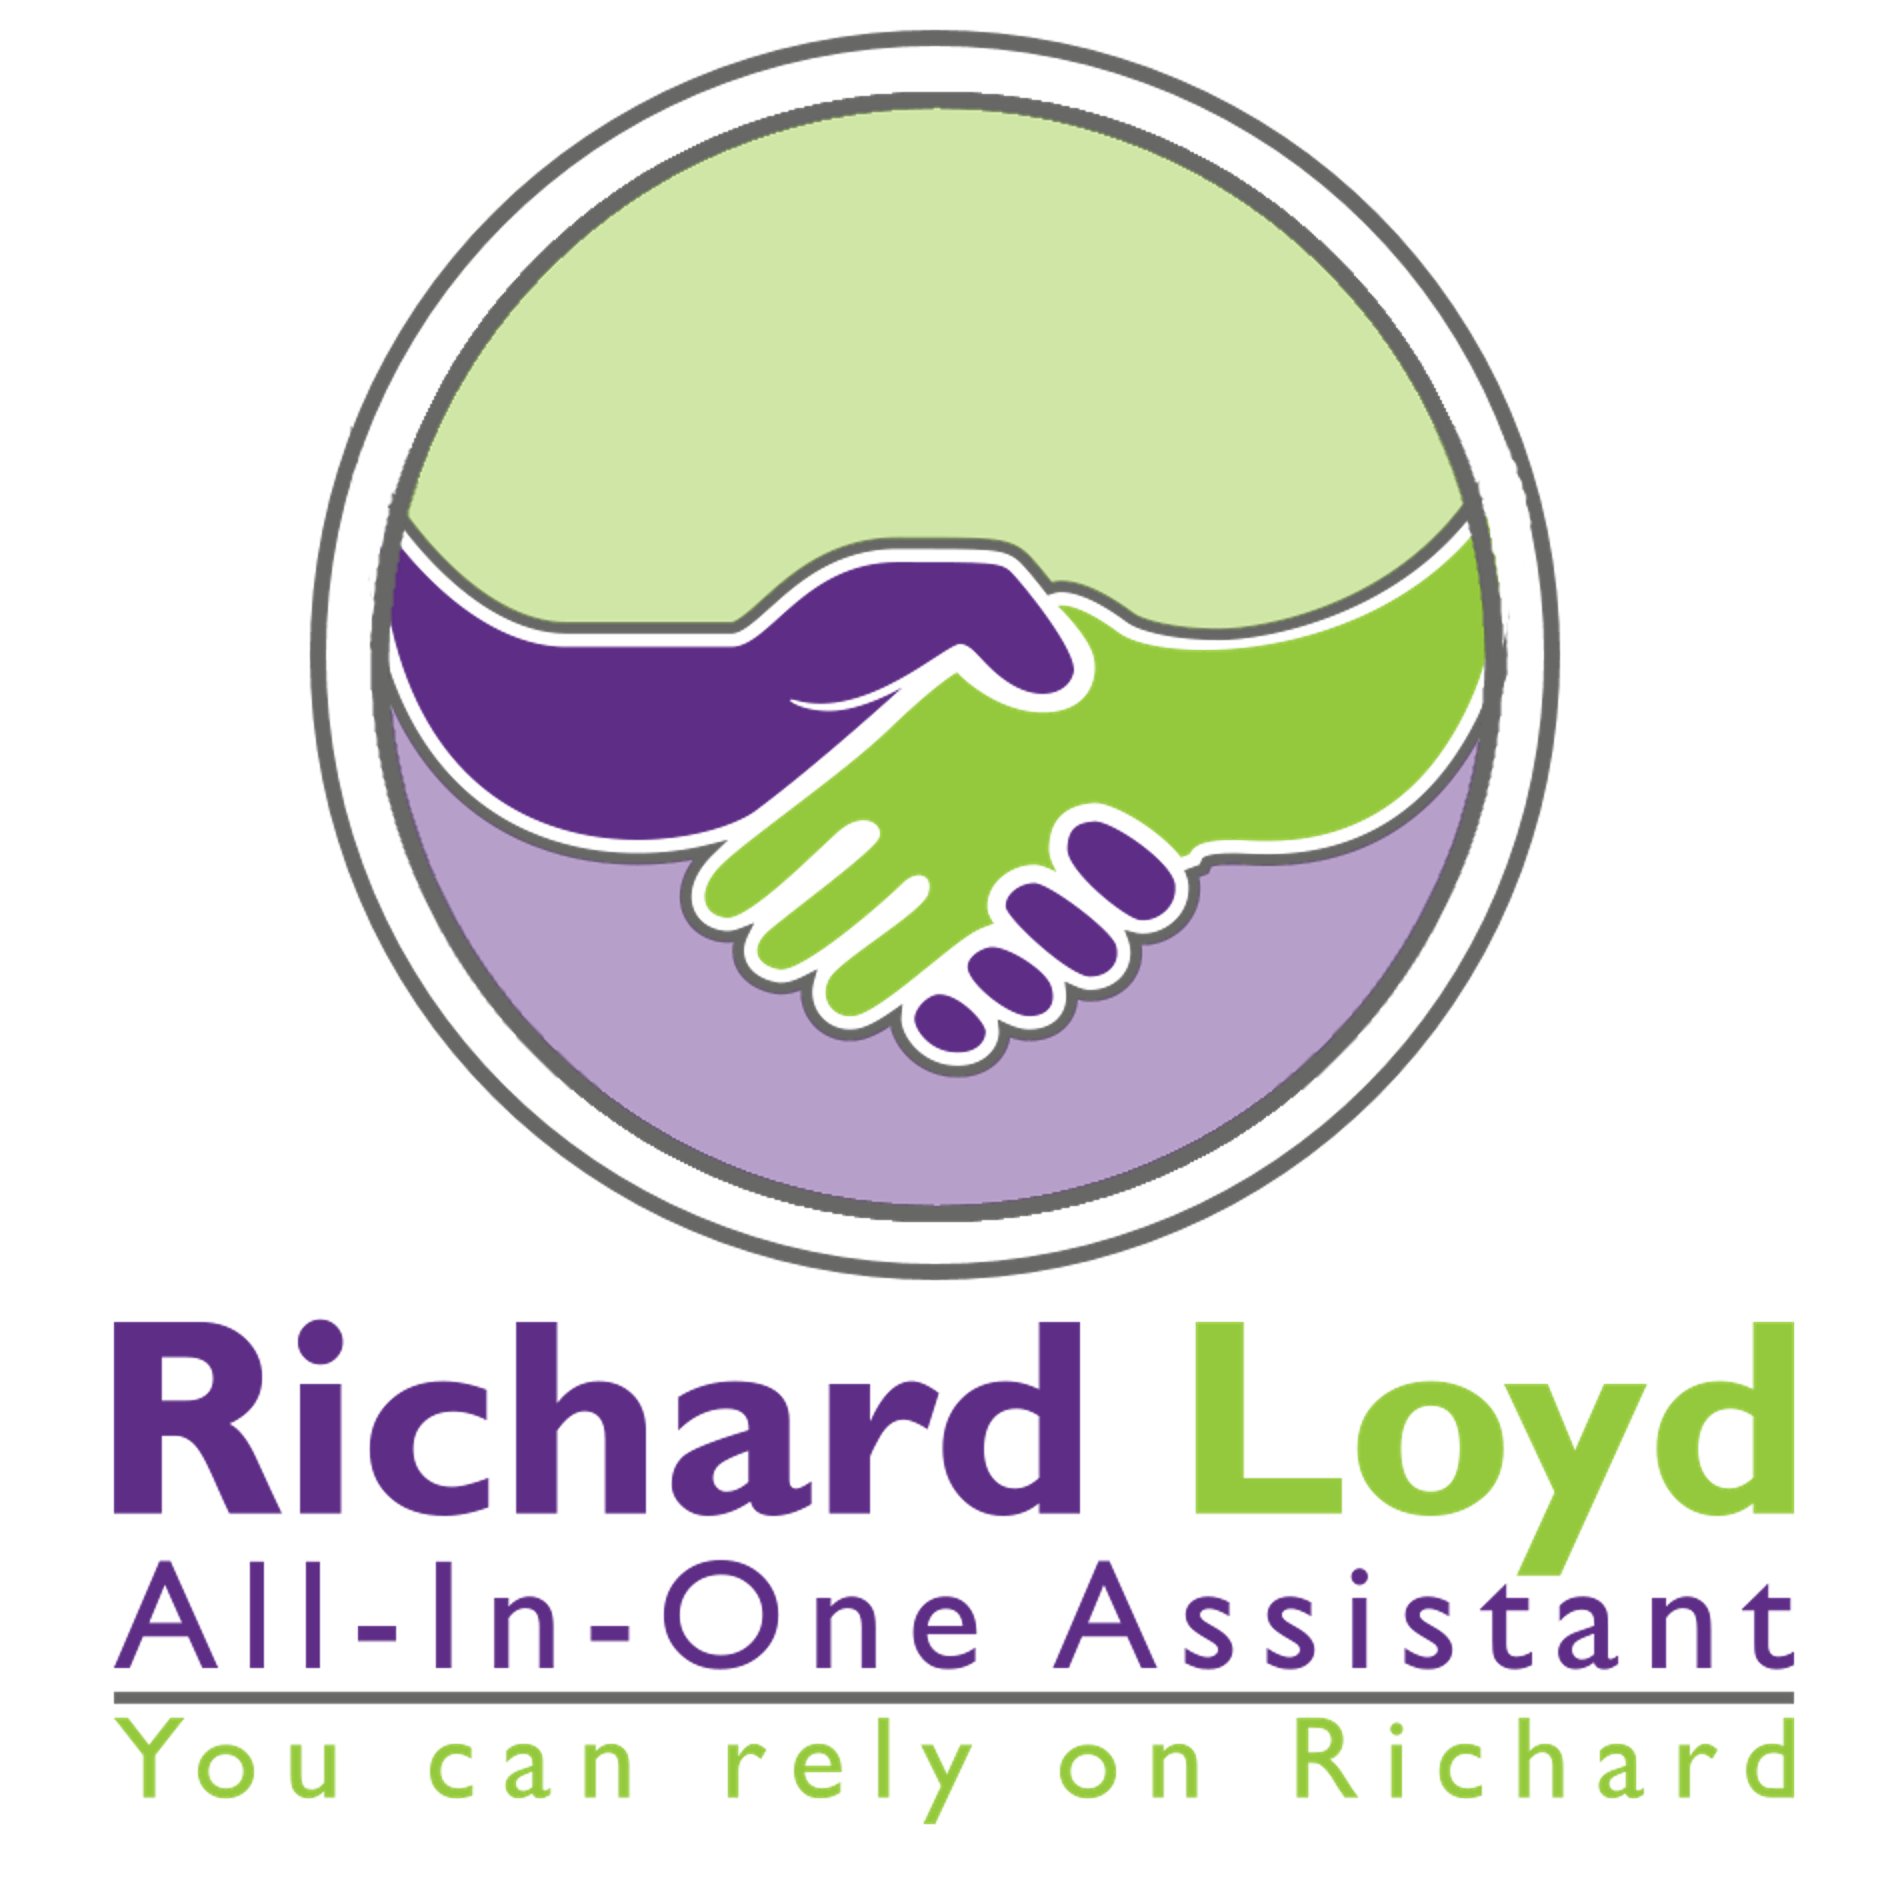 Providing a range of personal services from PC repair/maintenance to marketing and web design, Richard Loyd launches your small business skyward!